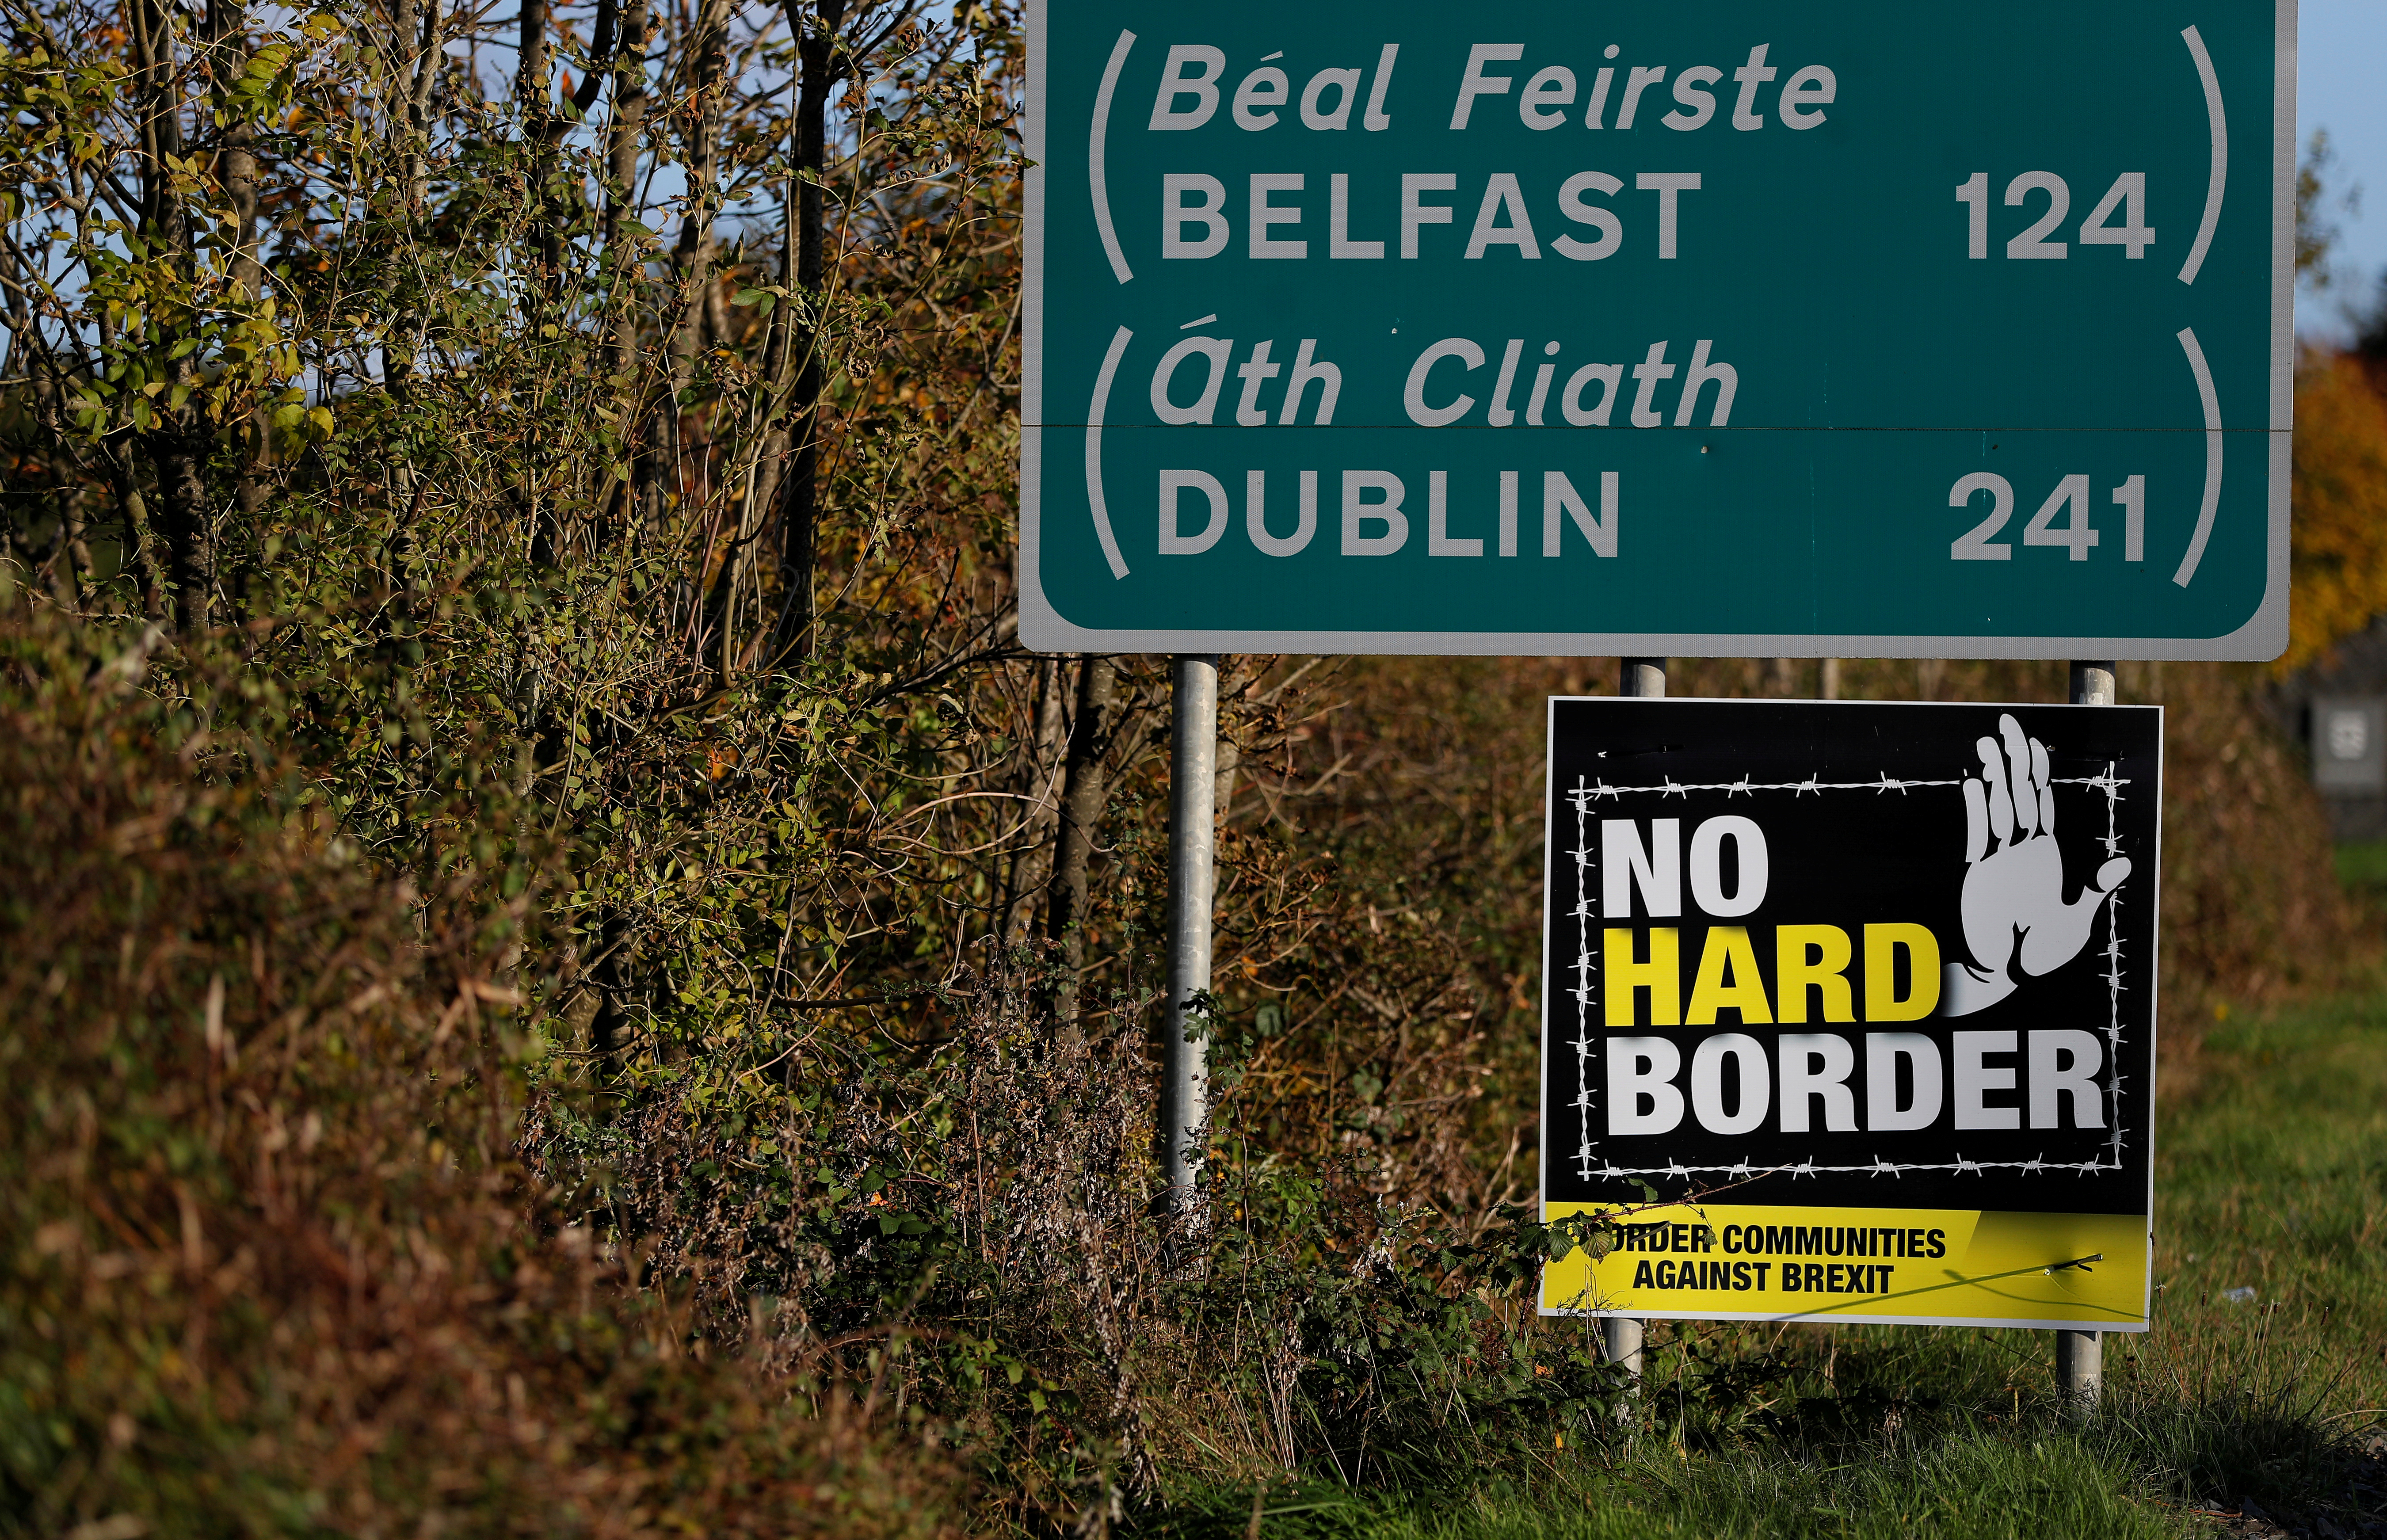 A 'No Hard Border' poster is seen below a road sign on the Irish side of the border between Ireland and Northern Ireland near Bridgend